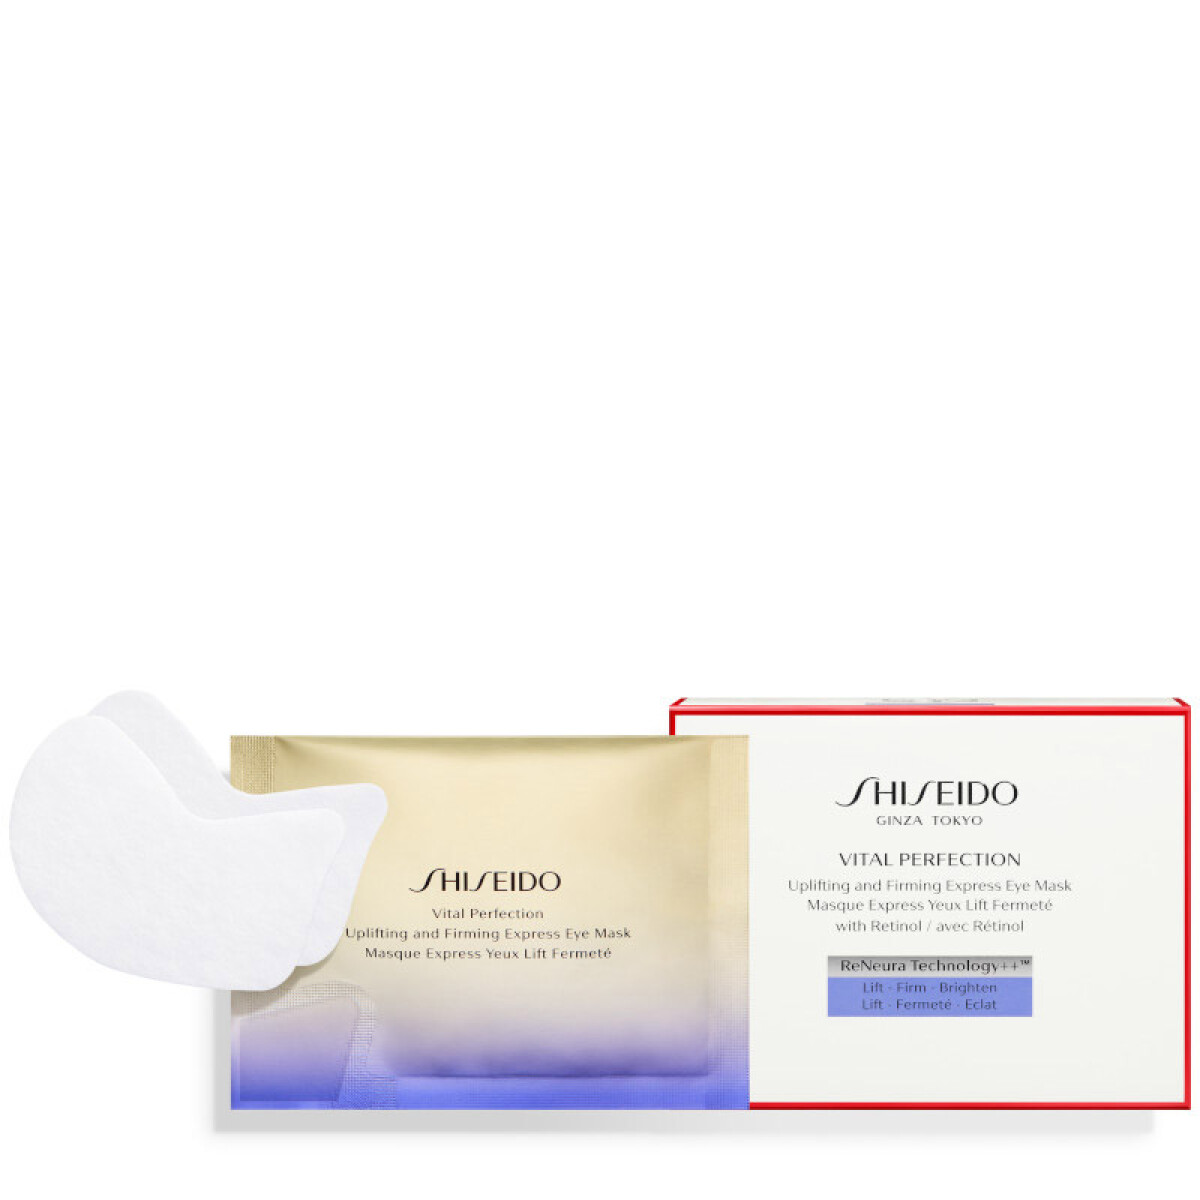 Vital Perfection Uplifting and Firming Eye Mask 2sheets x 12 